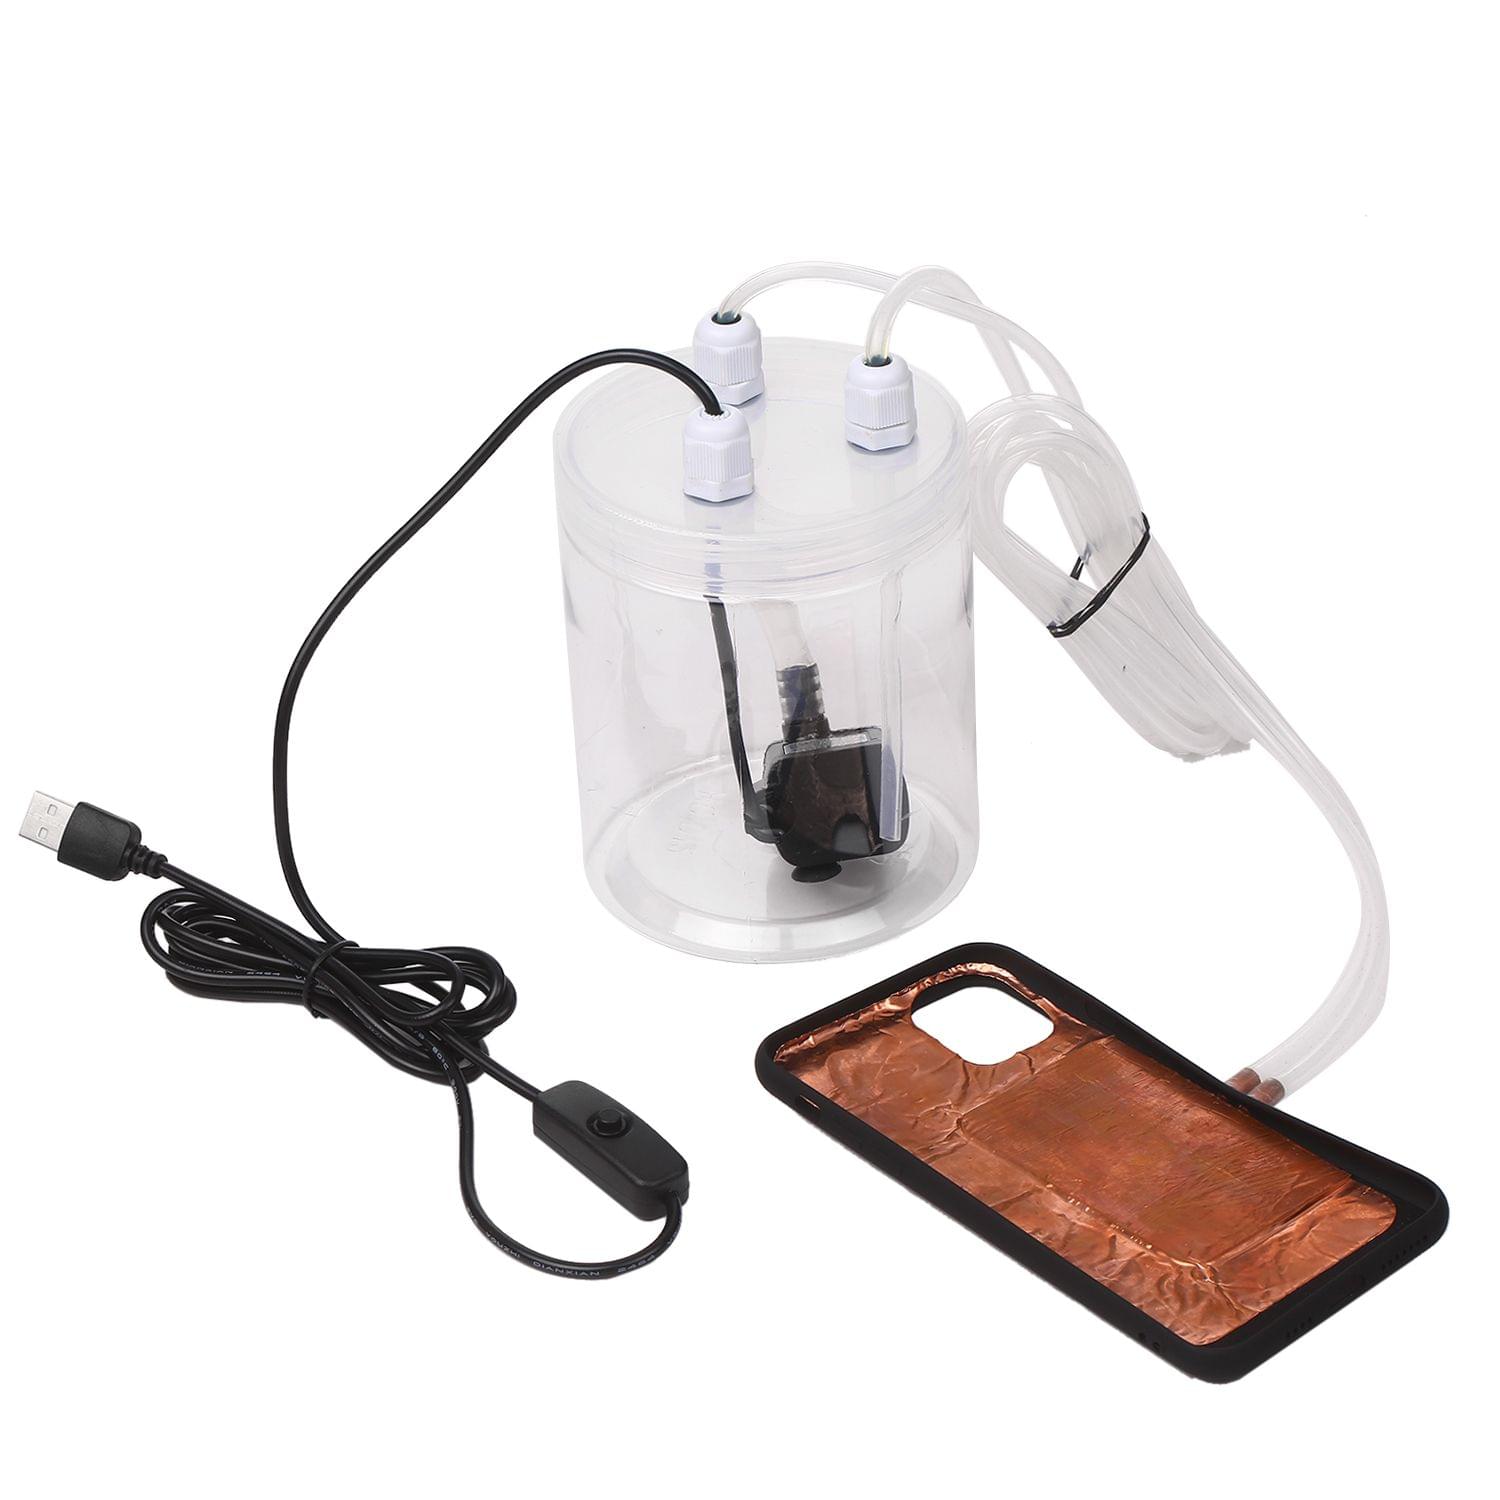 Phone Cooler Mobile Phone Radiator Water-cooled Cooling - Compatible with iPhone 11 6.1inch